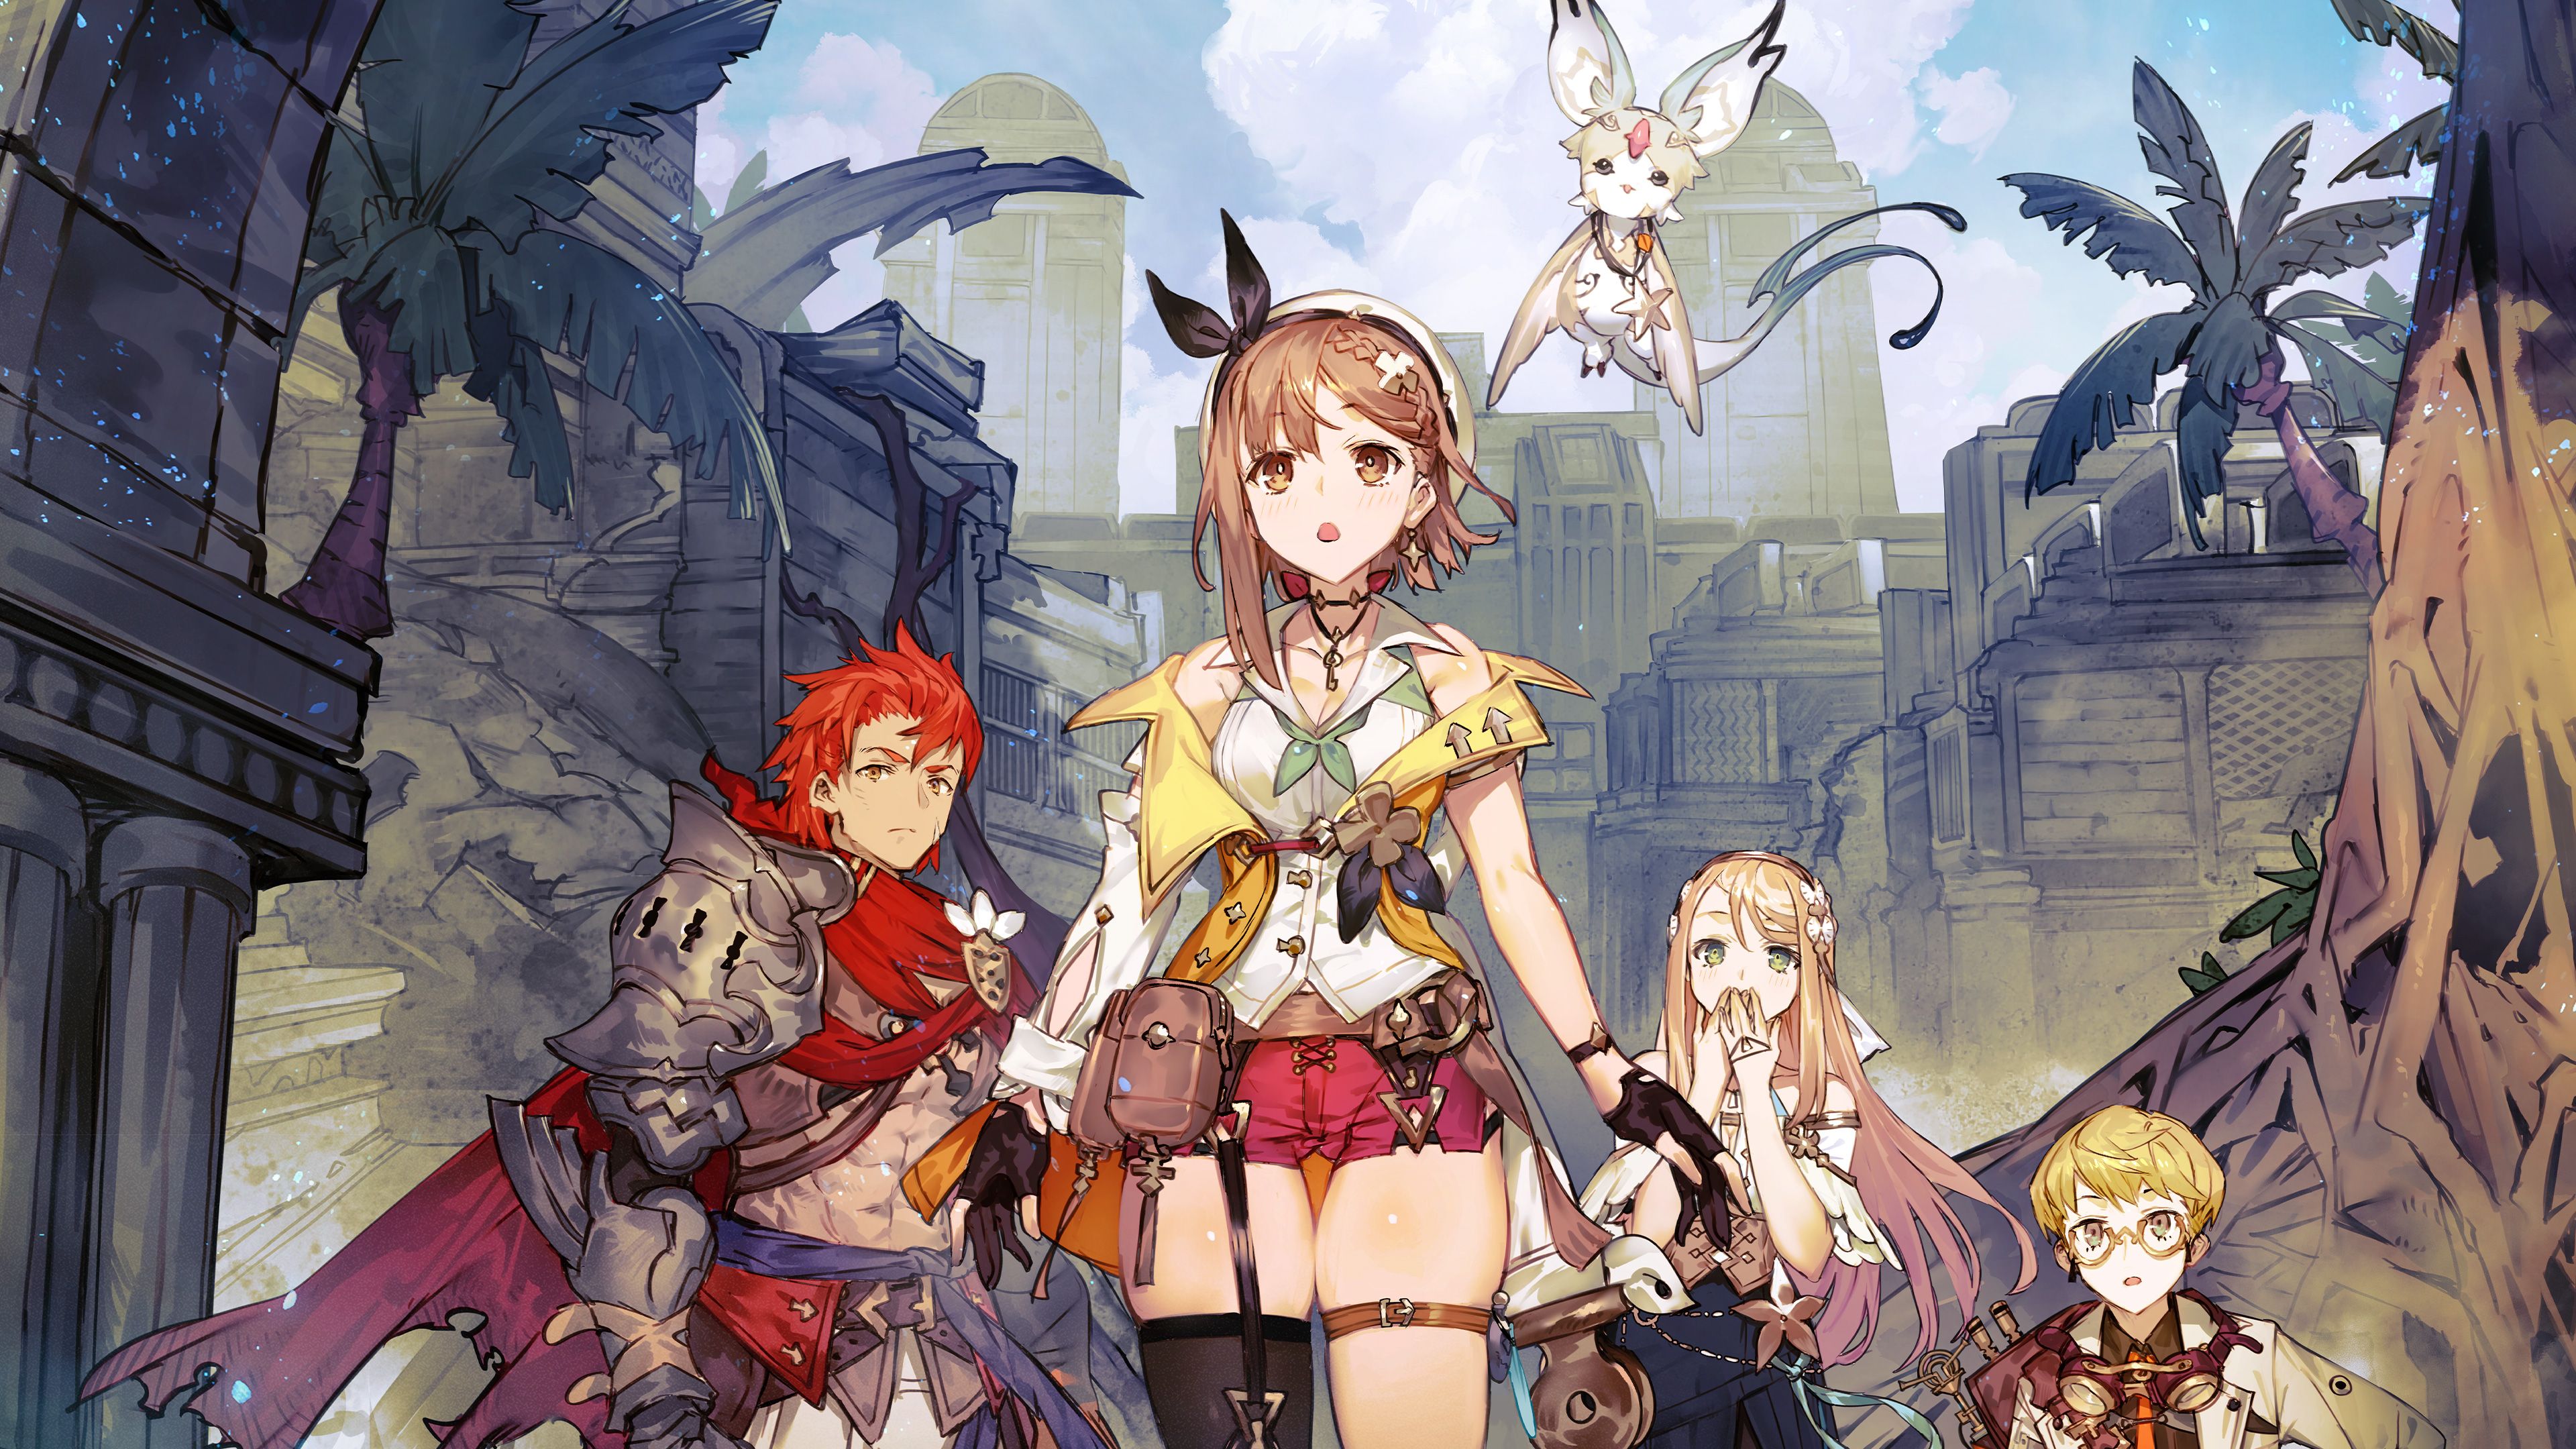 Video Game Atelier Ryza 2: Lost Legends & the Secret Fairy HD Wallpaper | Background Image